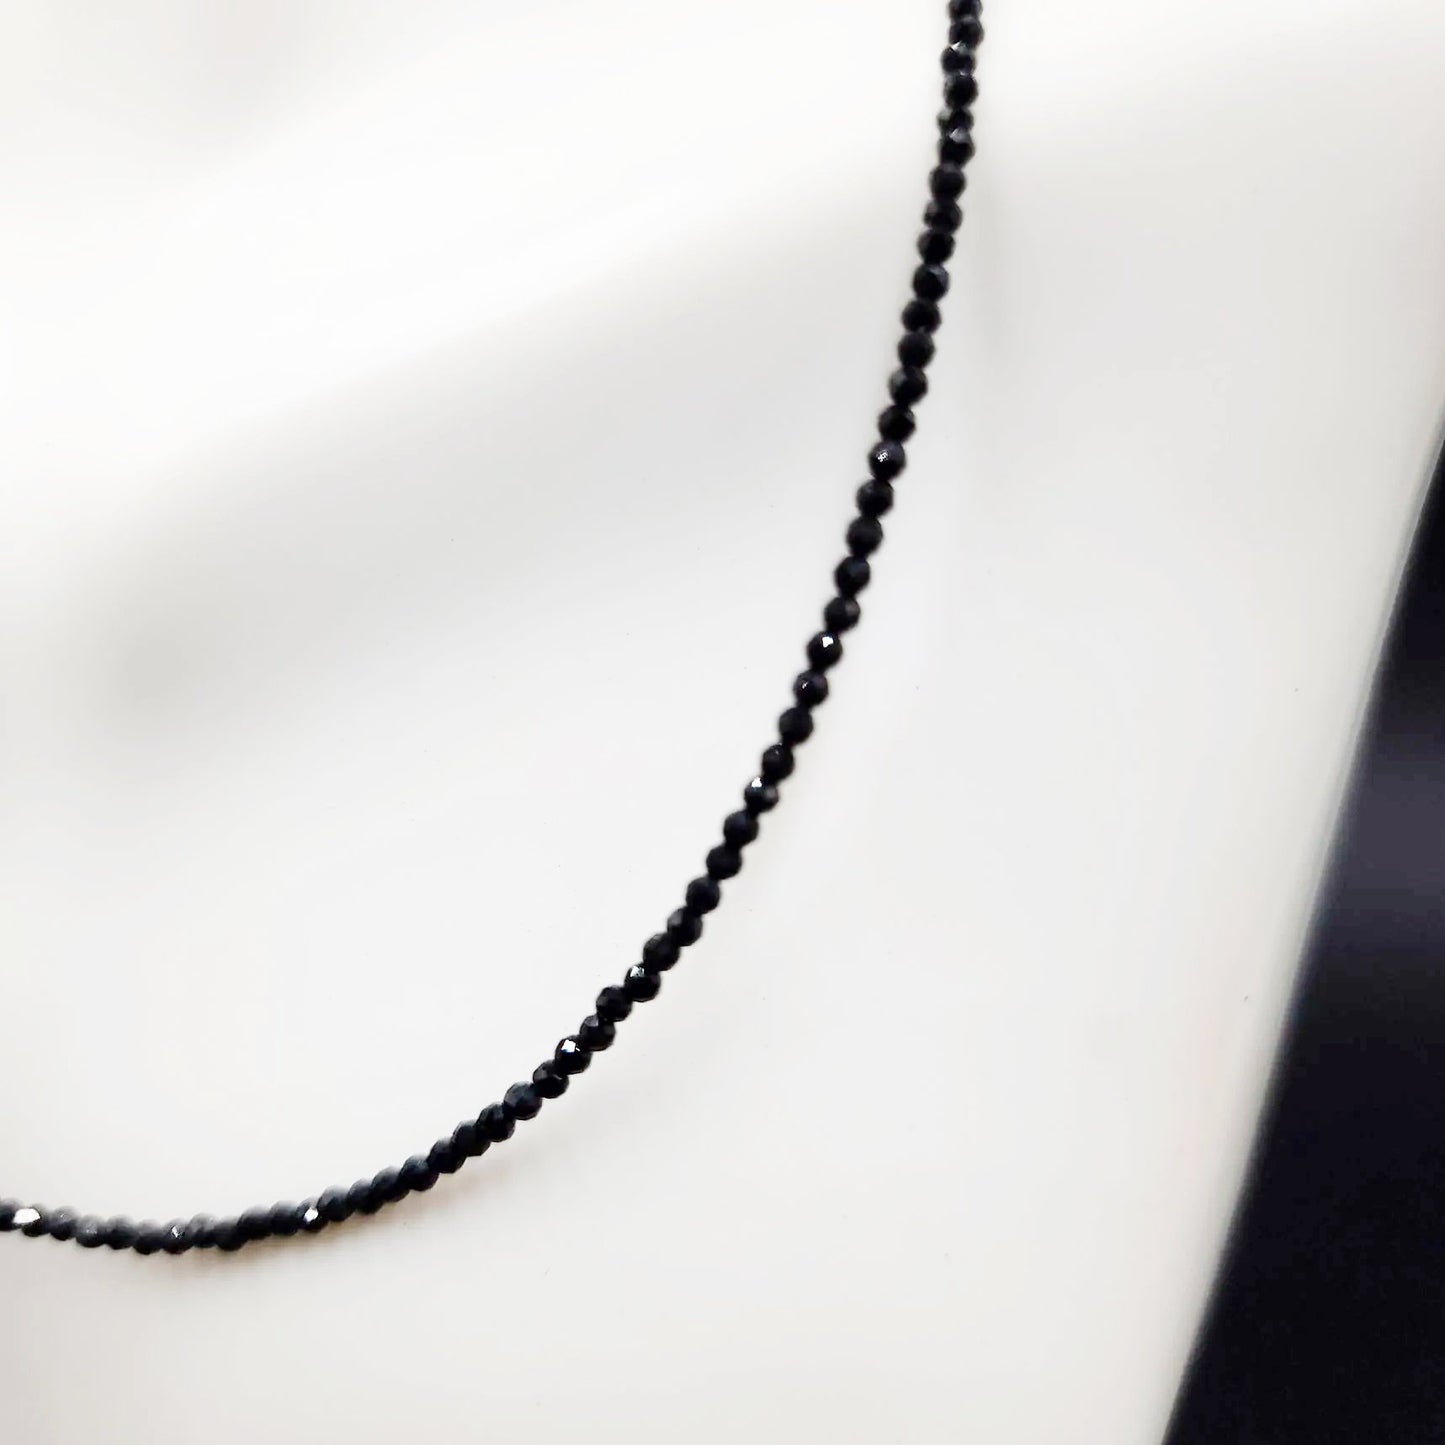 Black Tourmaline Necklace 2mm Bead Neck Chain - Elevated Metaphysical